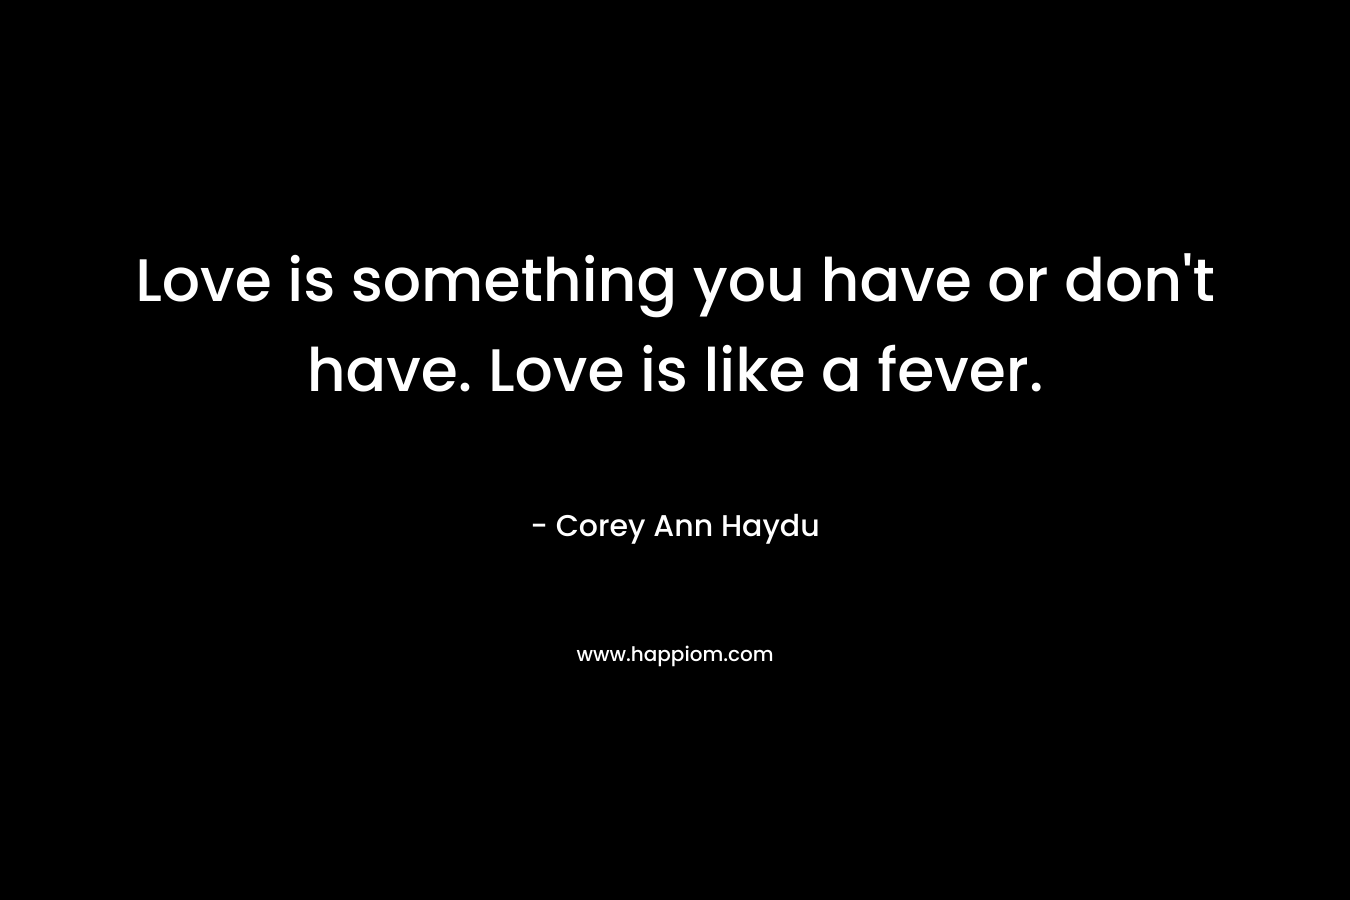 Love is something you have or don't have. Love is like a fever.